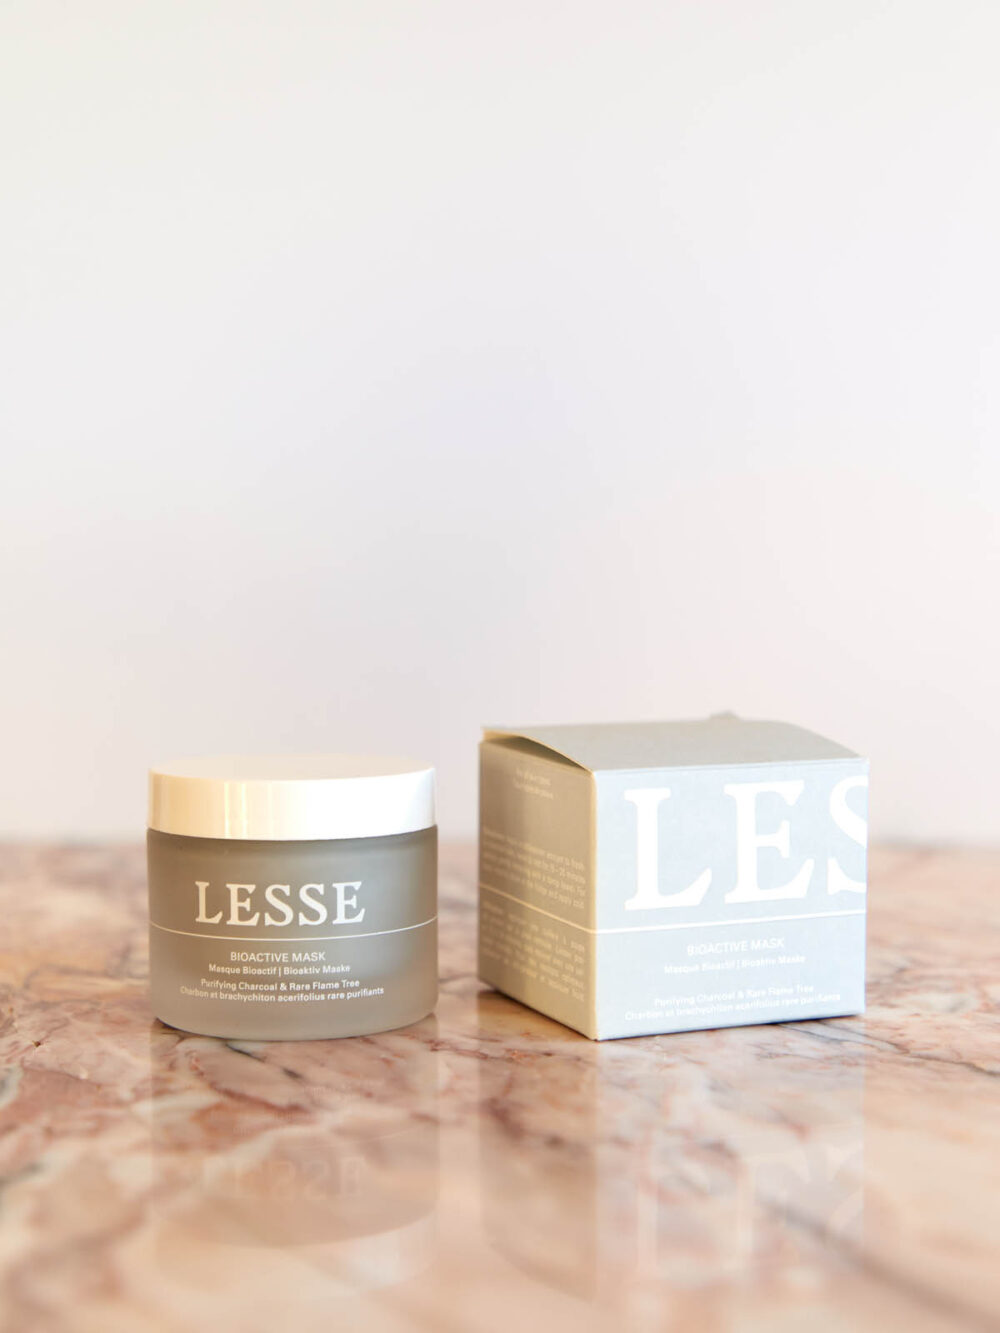 Bioactive Mask by Lesse with box on pink marble